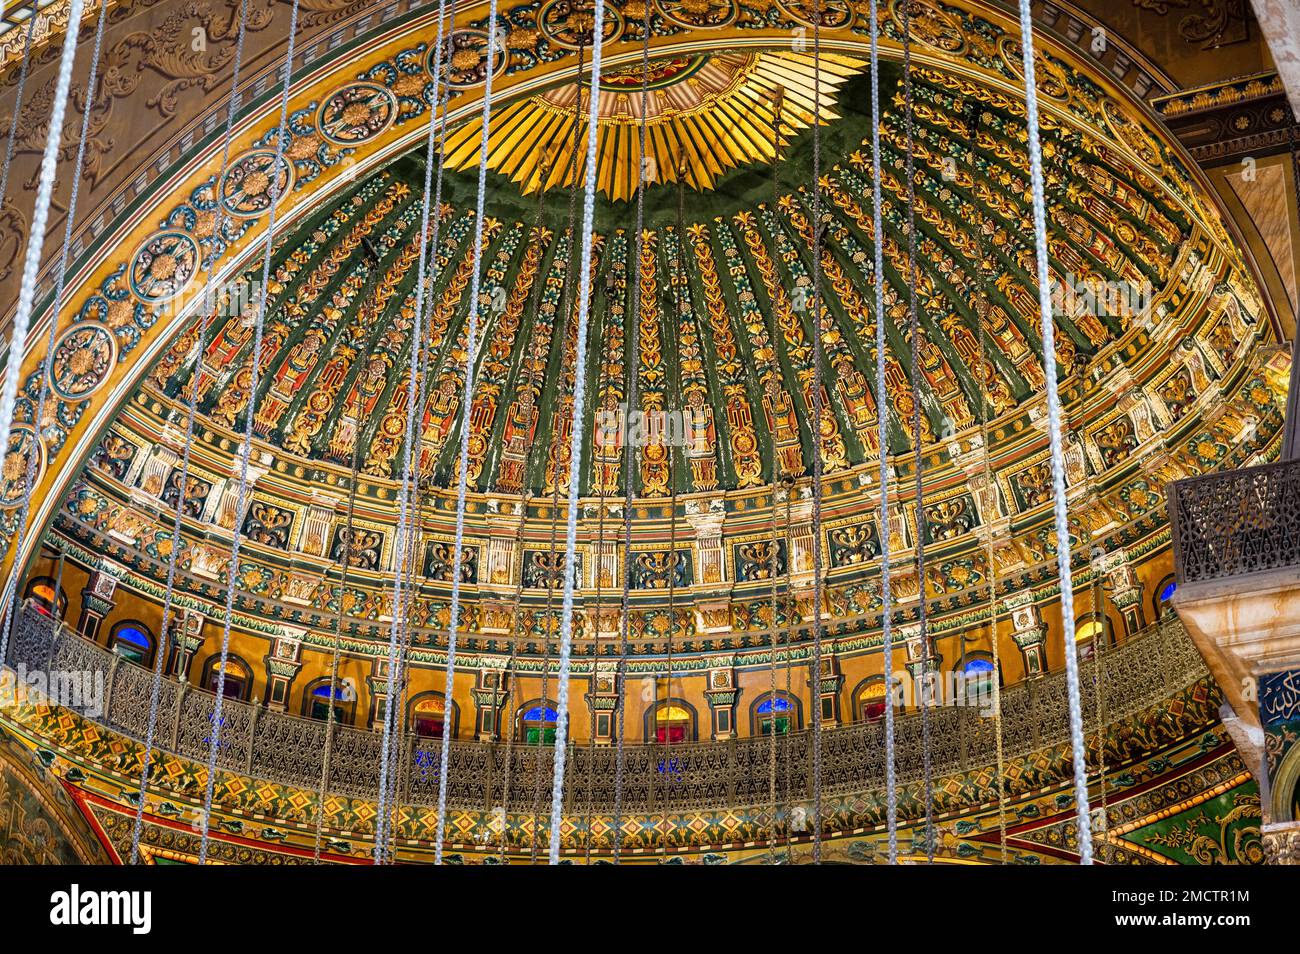 Colorful interior of the dome in the Muhammad Ali Mosque in the Cairo Citadel overlooking the city of Cairo, Egypt. Stock Photo